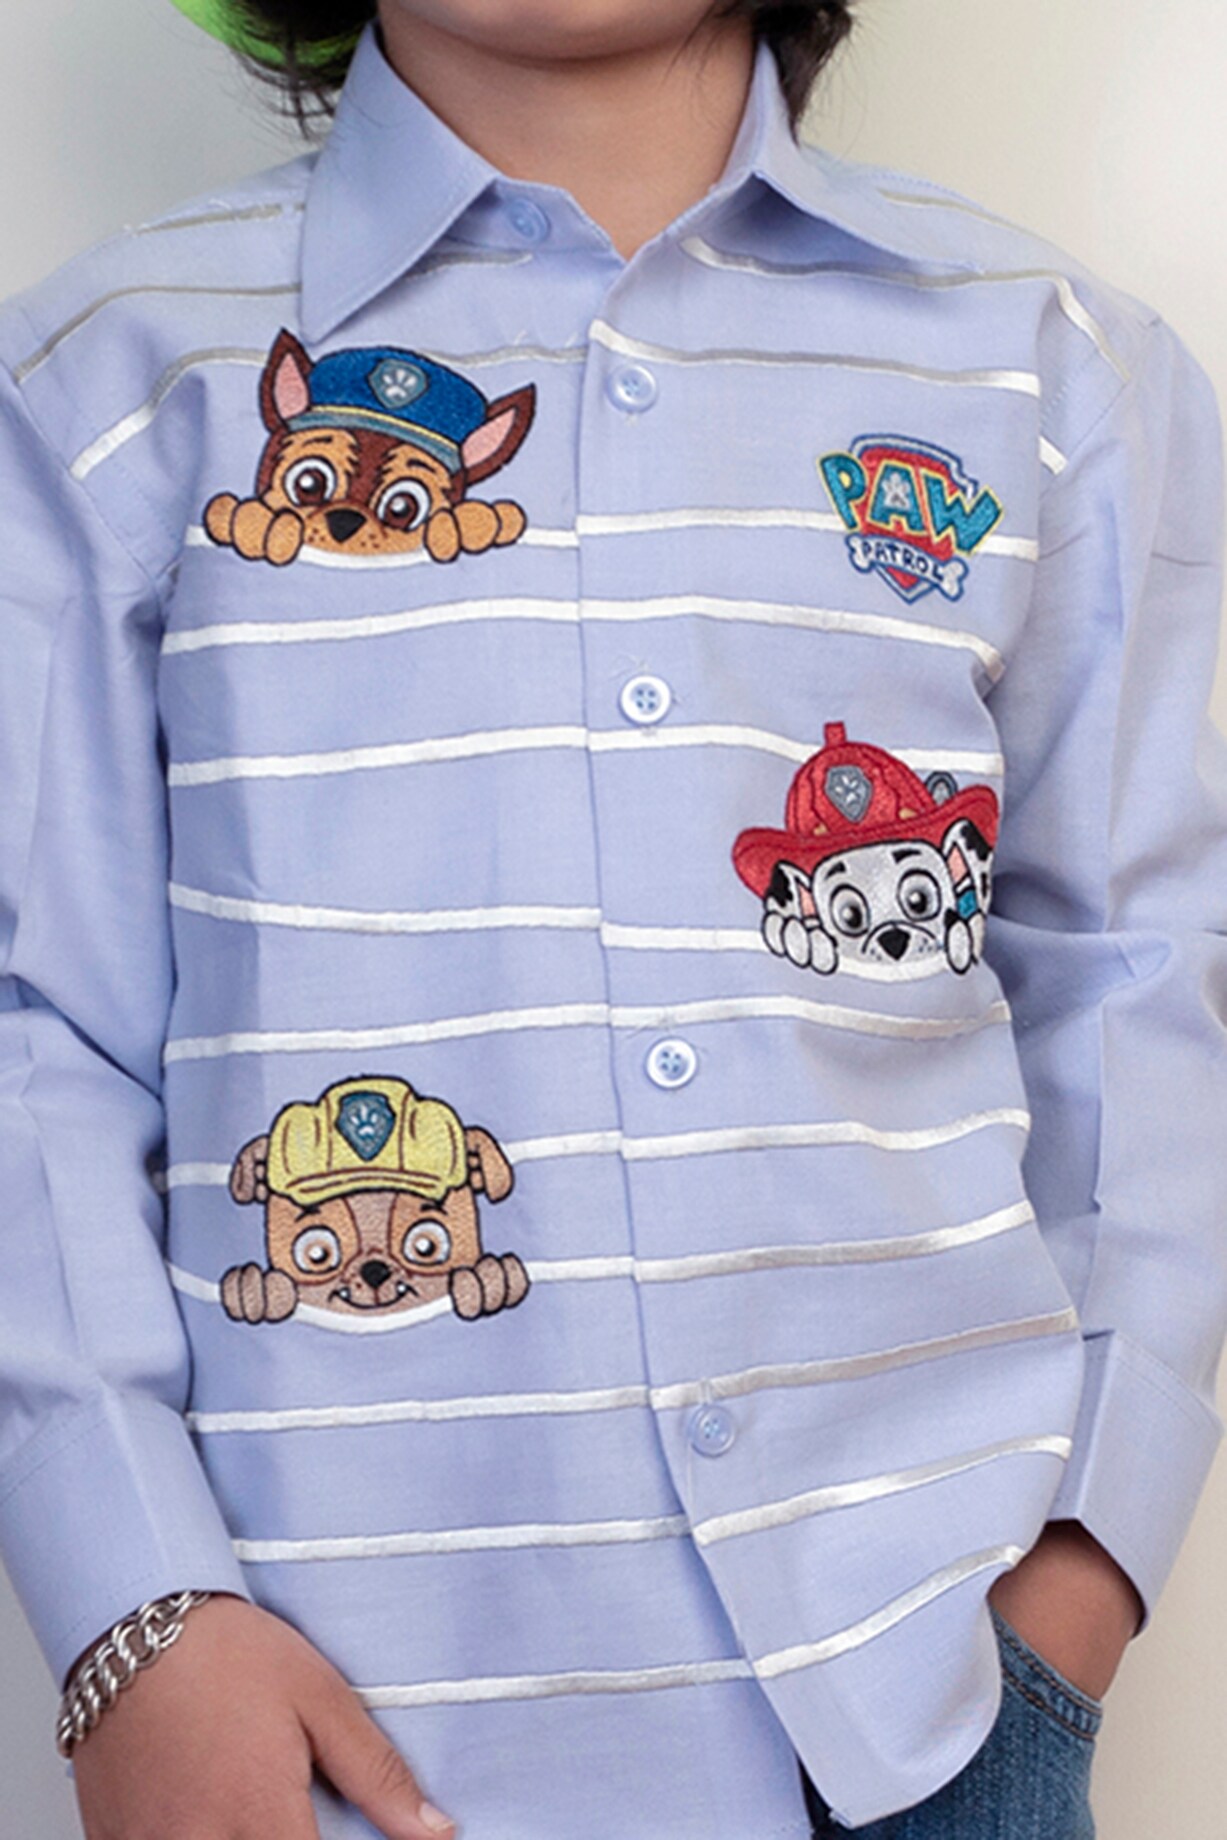 Patrol Boys Up Design at Hoity Blue by Moppet 2024 For Pernia\'s Shirt Shop Pop Paw